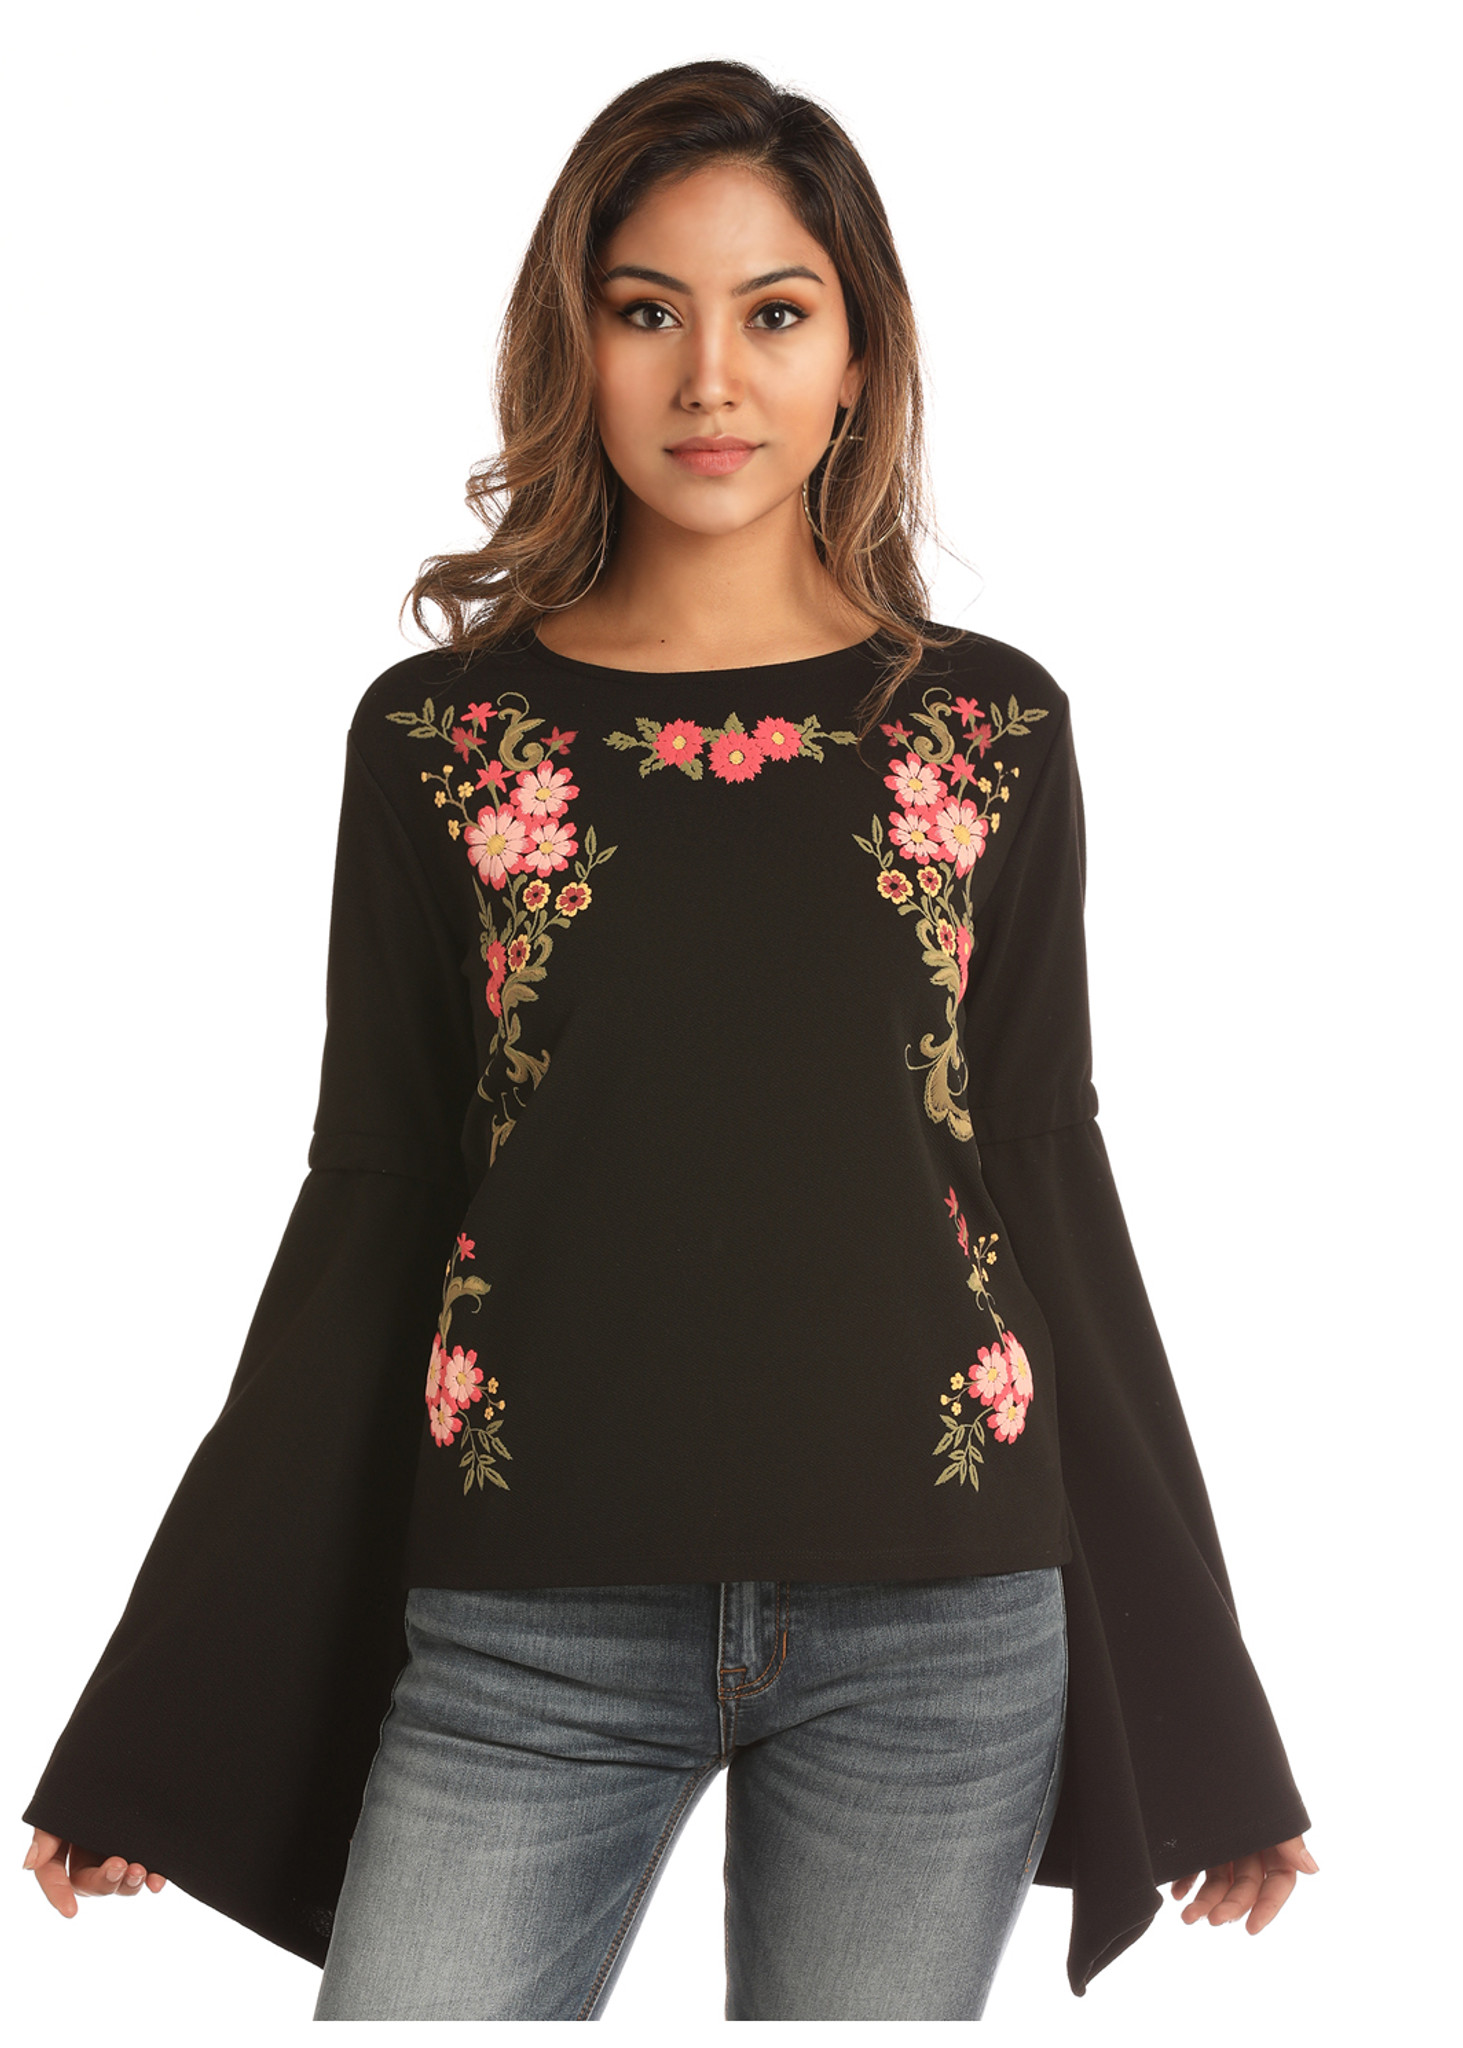 Women's Rock & Roll L/S, Black with Floral Embroidery, Bell Sleeve